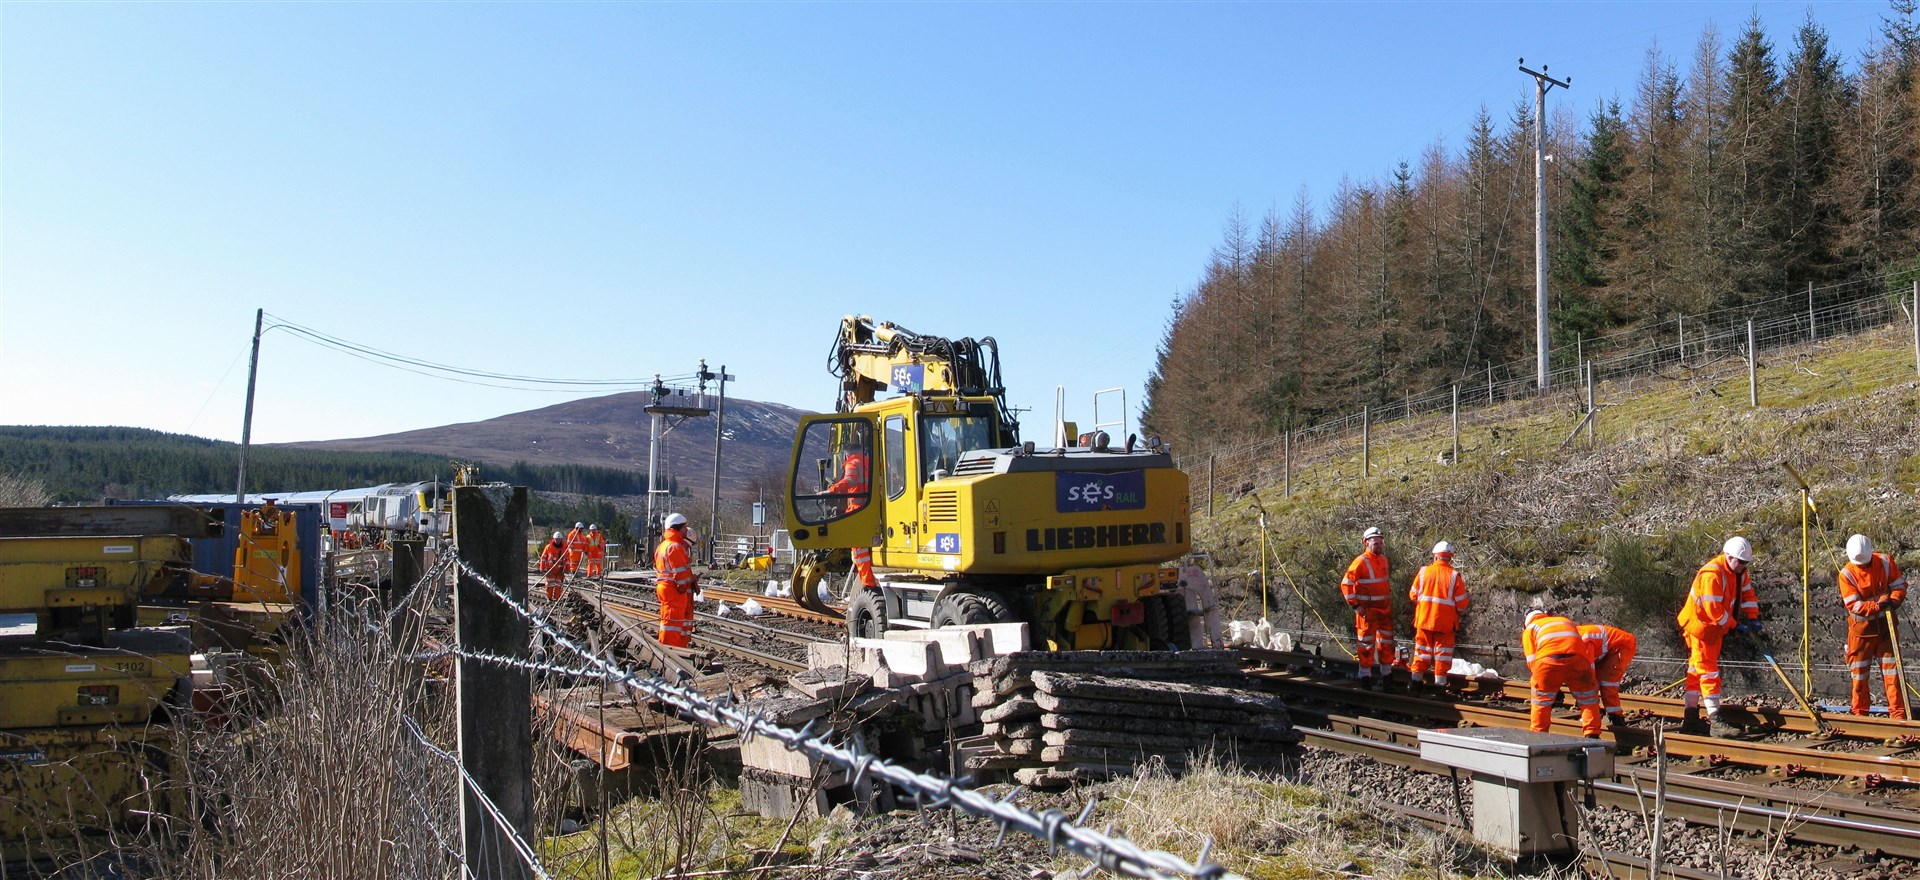 The team are now trying to correct the track itself after the damage done by Saturday's derailment